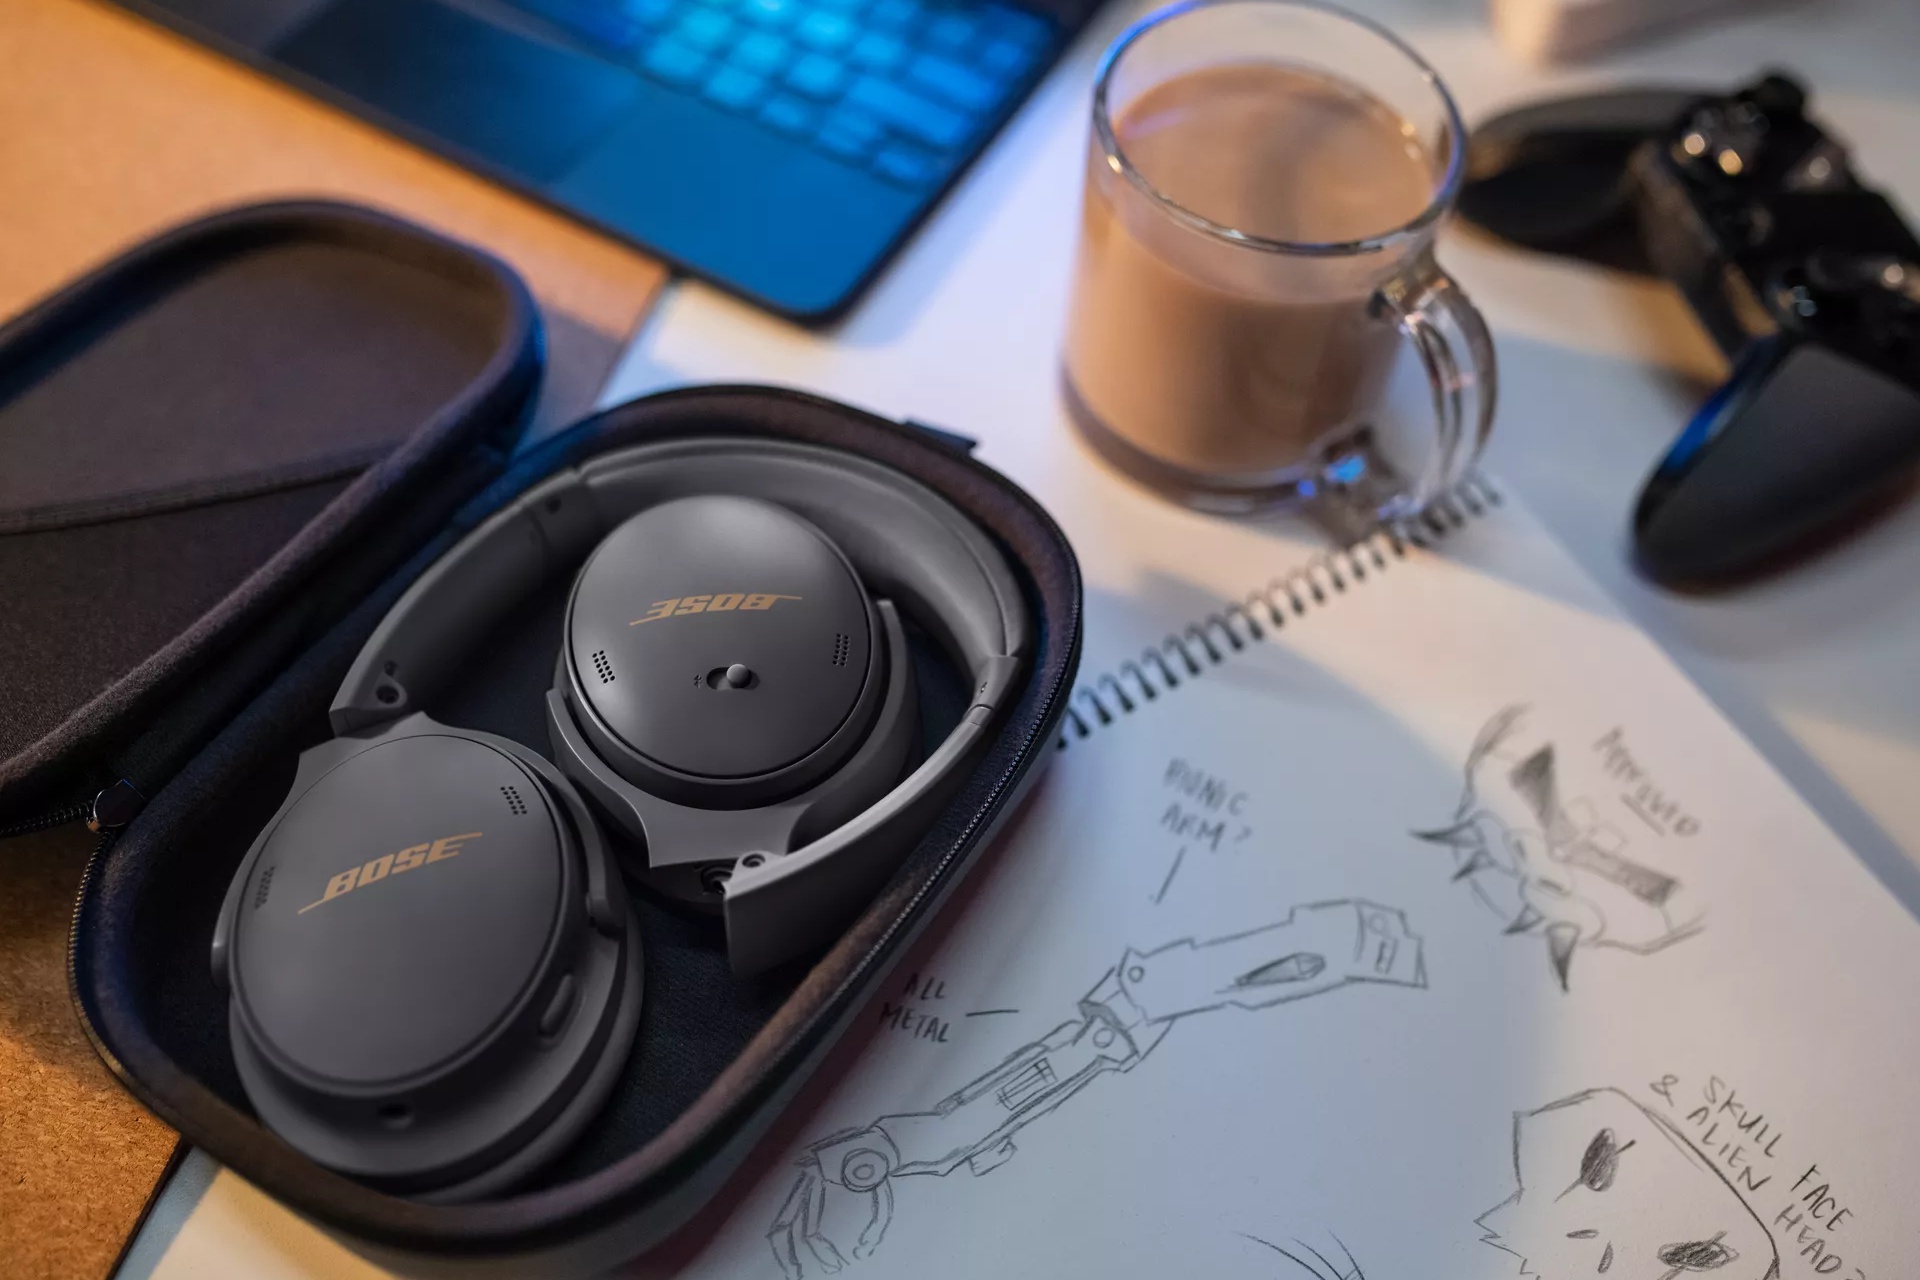 Bose QuietComfort 45 Headphones in their carry case on a desk